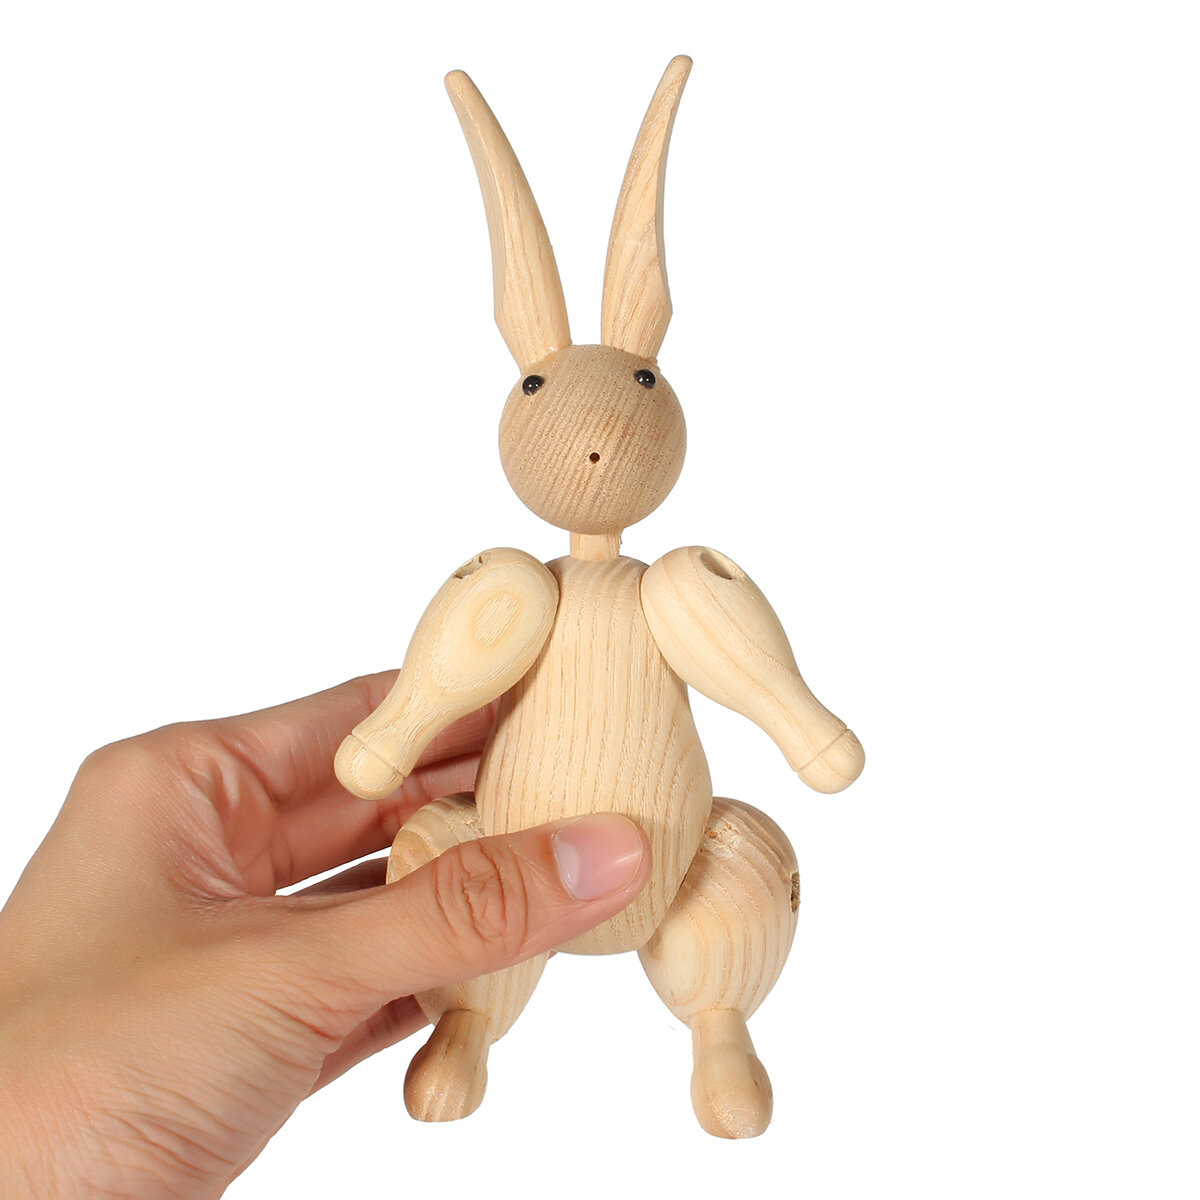 Wood Carving Miss Rabbit Figurines Joints Puppets Animal Art Home Decoration Crafts COD